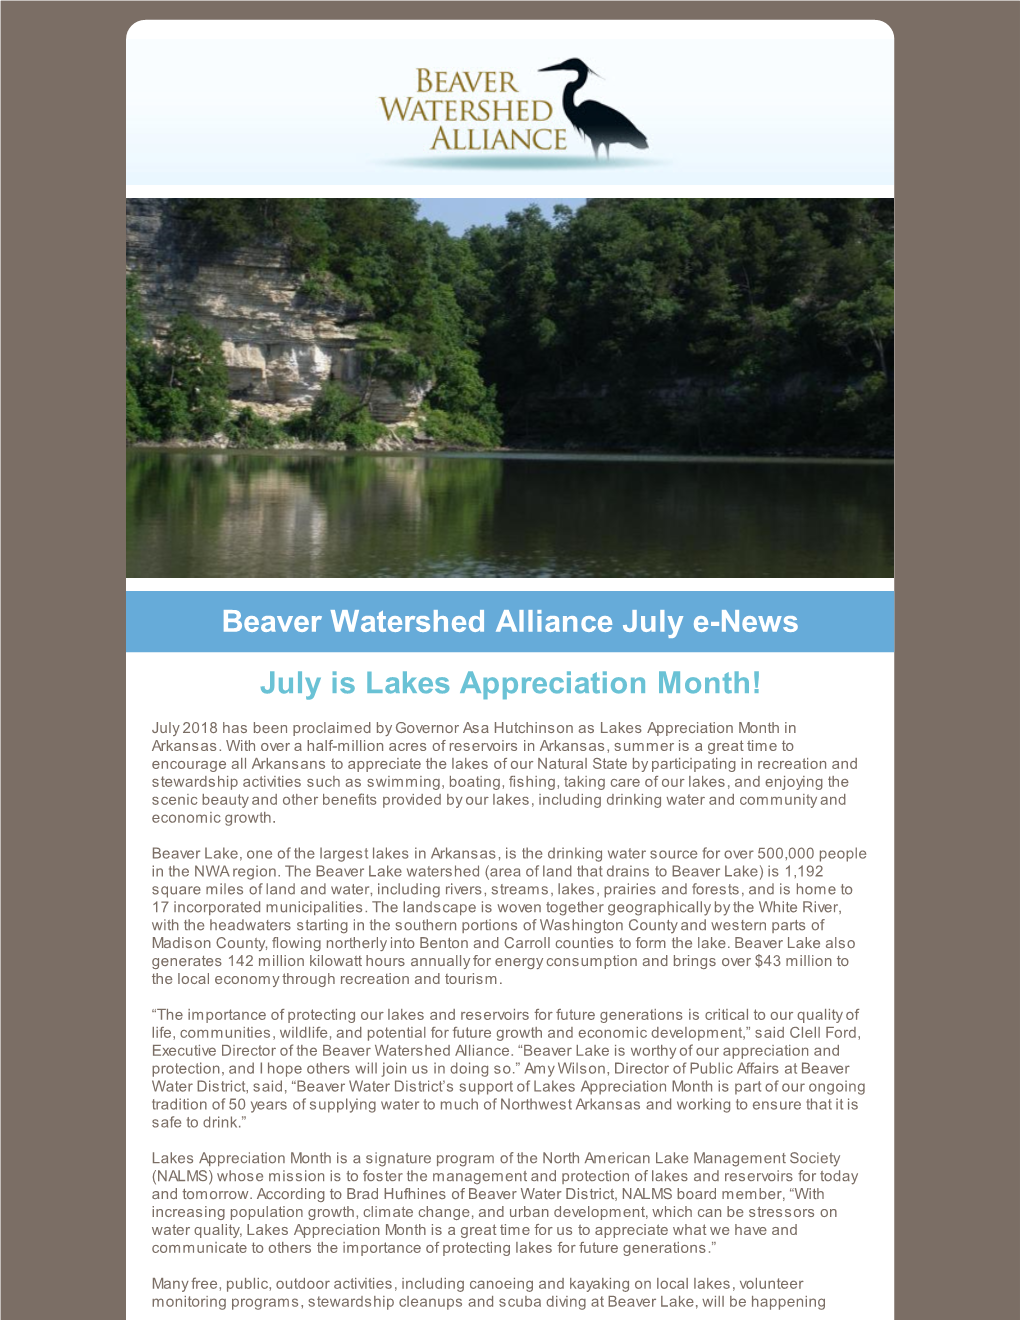 Beaver Watershed Alliance July E-News July Is Lakes Appreciation Month!